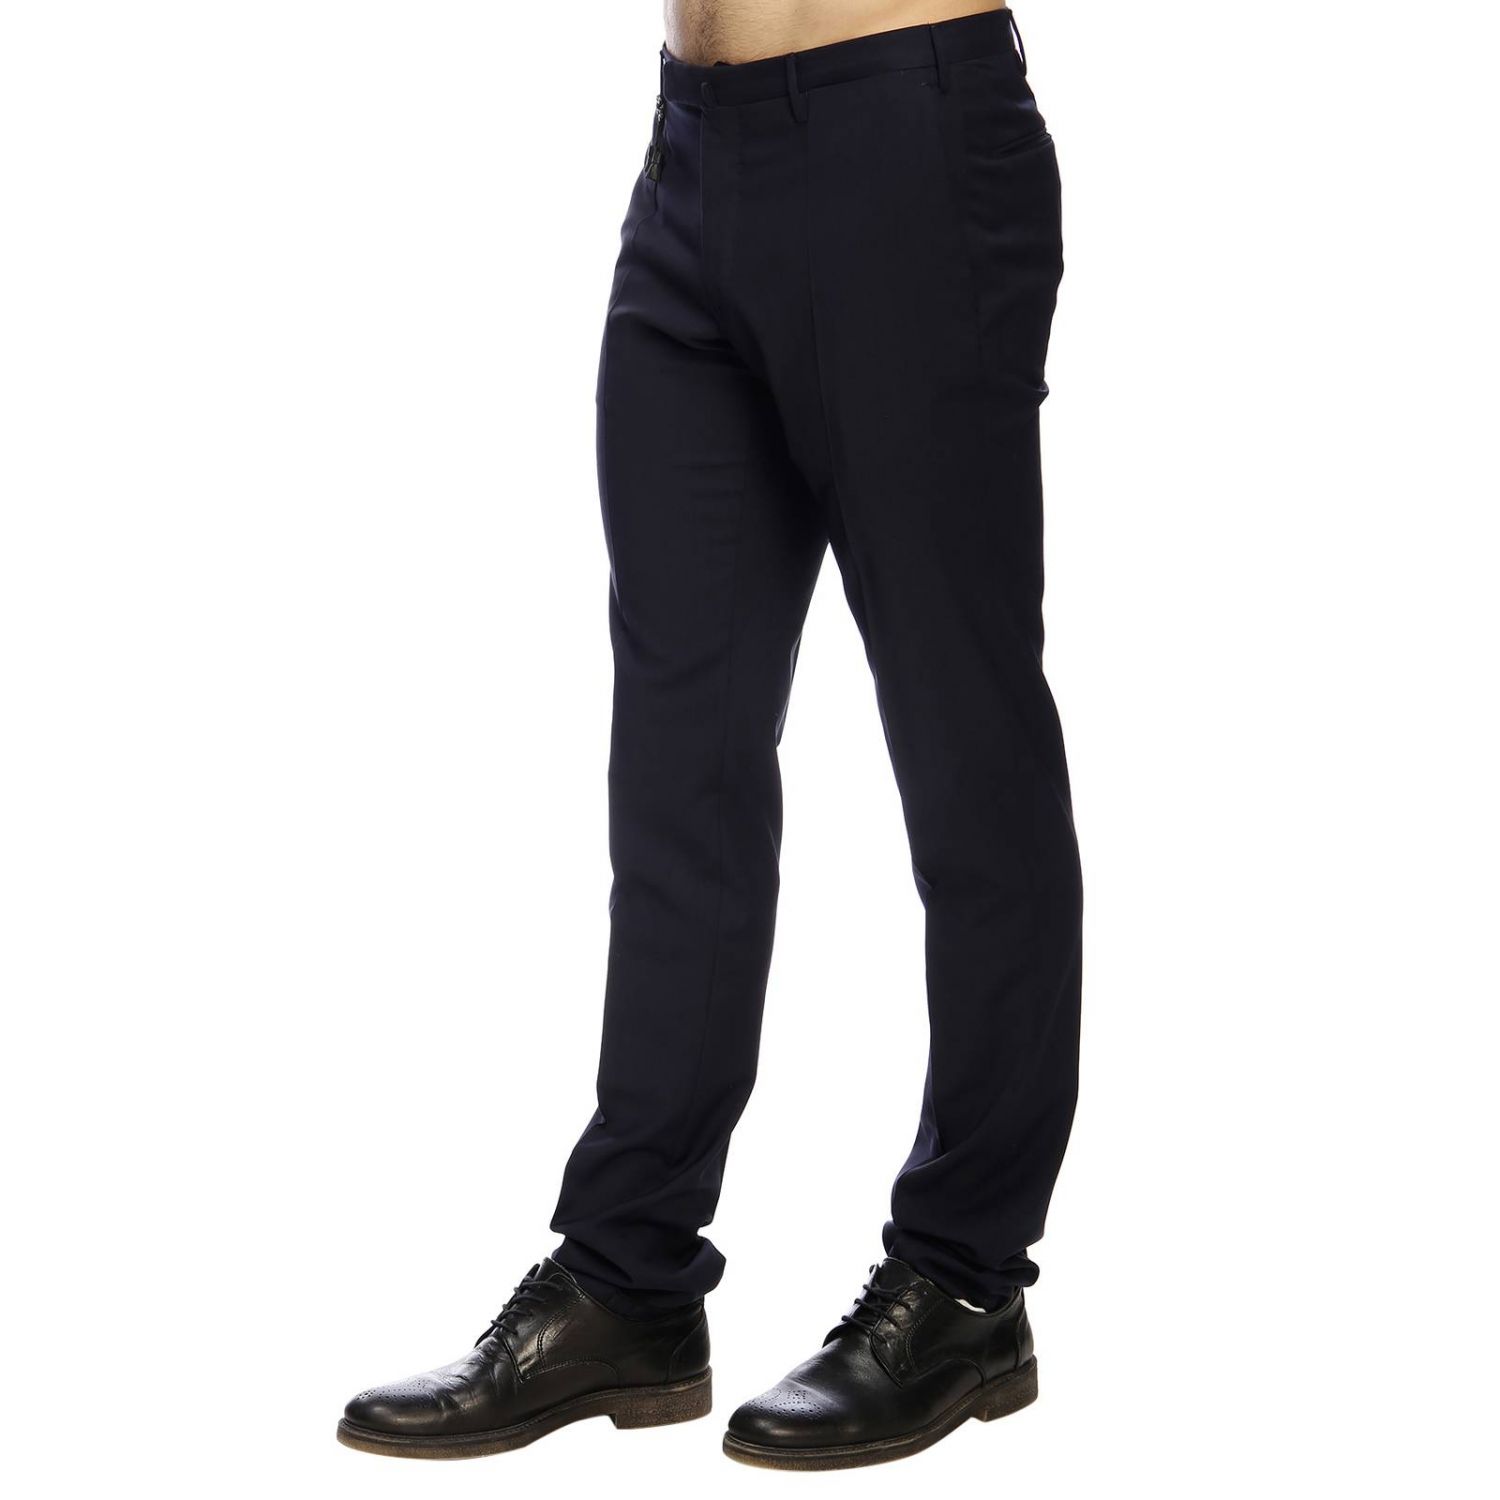 Incotex Outlet: Pants men - Blue | Pants Incotex 1AT030 5855T GIGLIO.COM